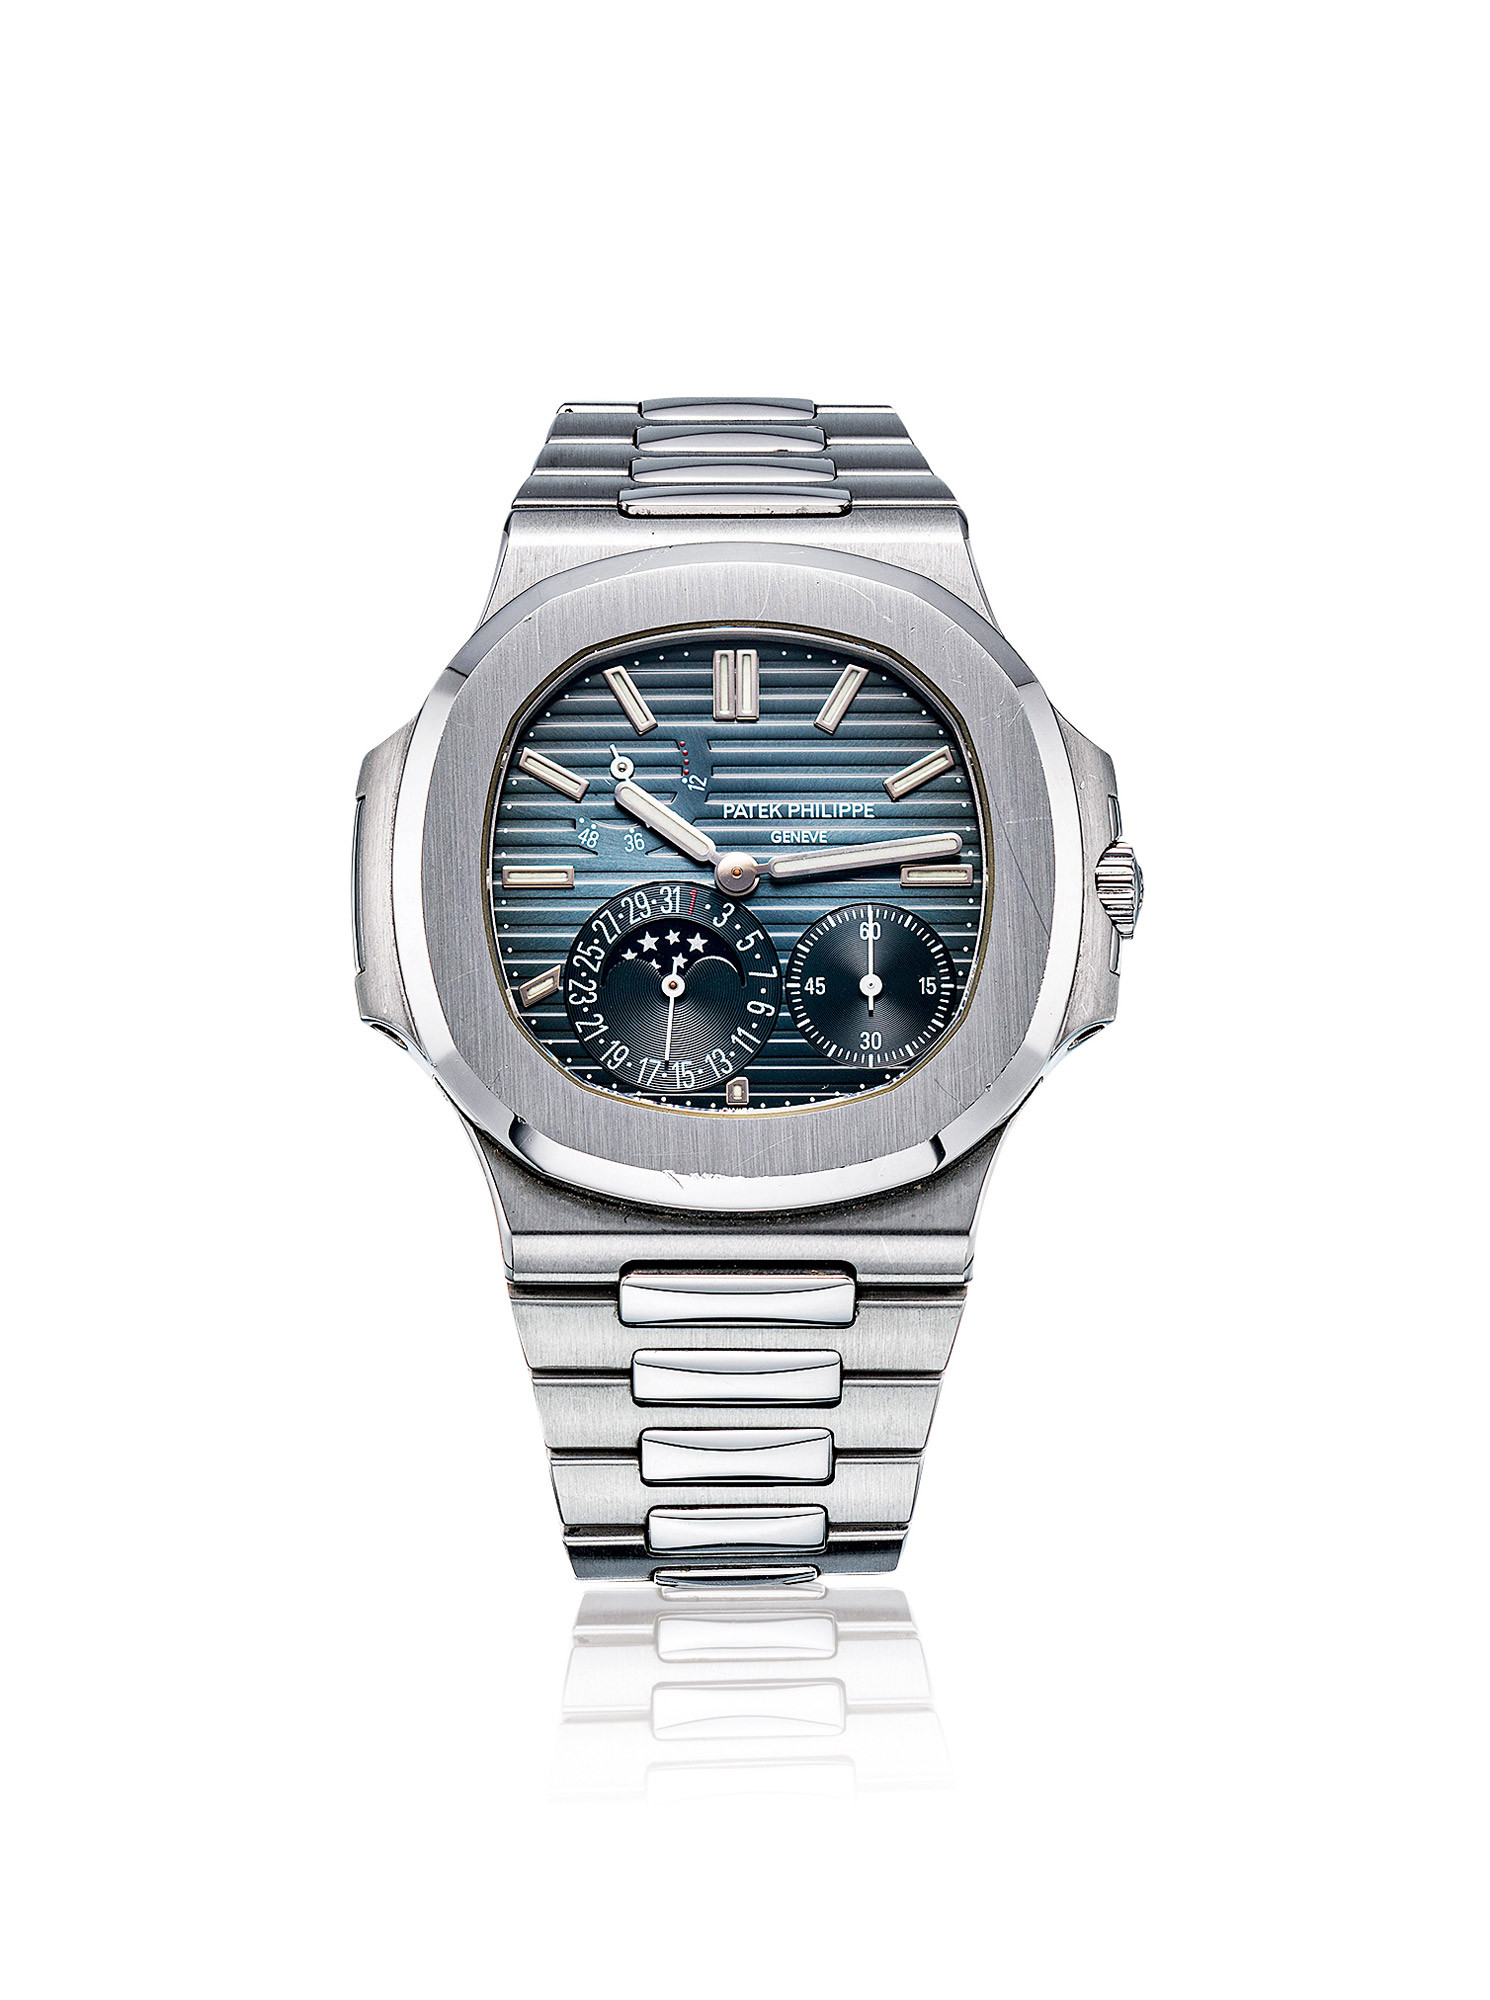 PATEK PHILIPPE A FINE STAINLESS STEEL ROUNDED OCTAGONAL AUTOMATIC BRACELET WATCH，WITH DATE，MOON PHASES，POWER RESERVE INDICATORS AND SMALL SECONDS，ACCOMPANIED WITH CERTIFICATE OF ORIGIN AND PRESENTATION BOX